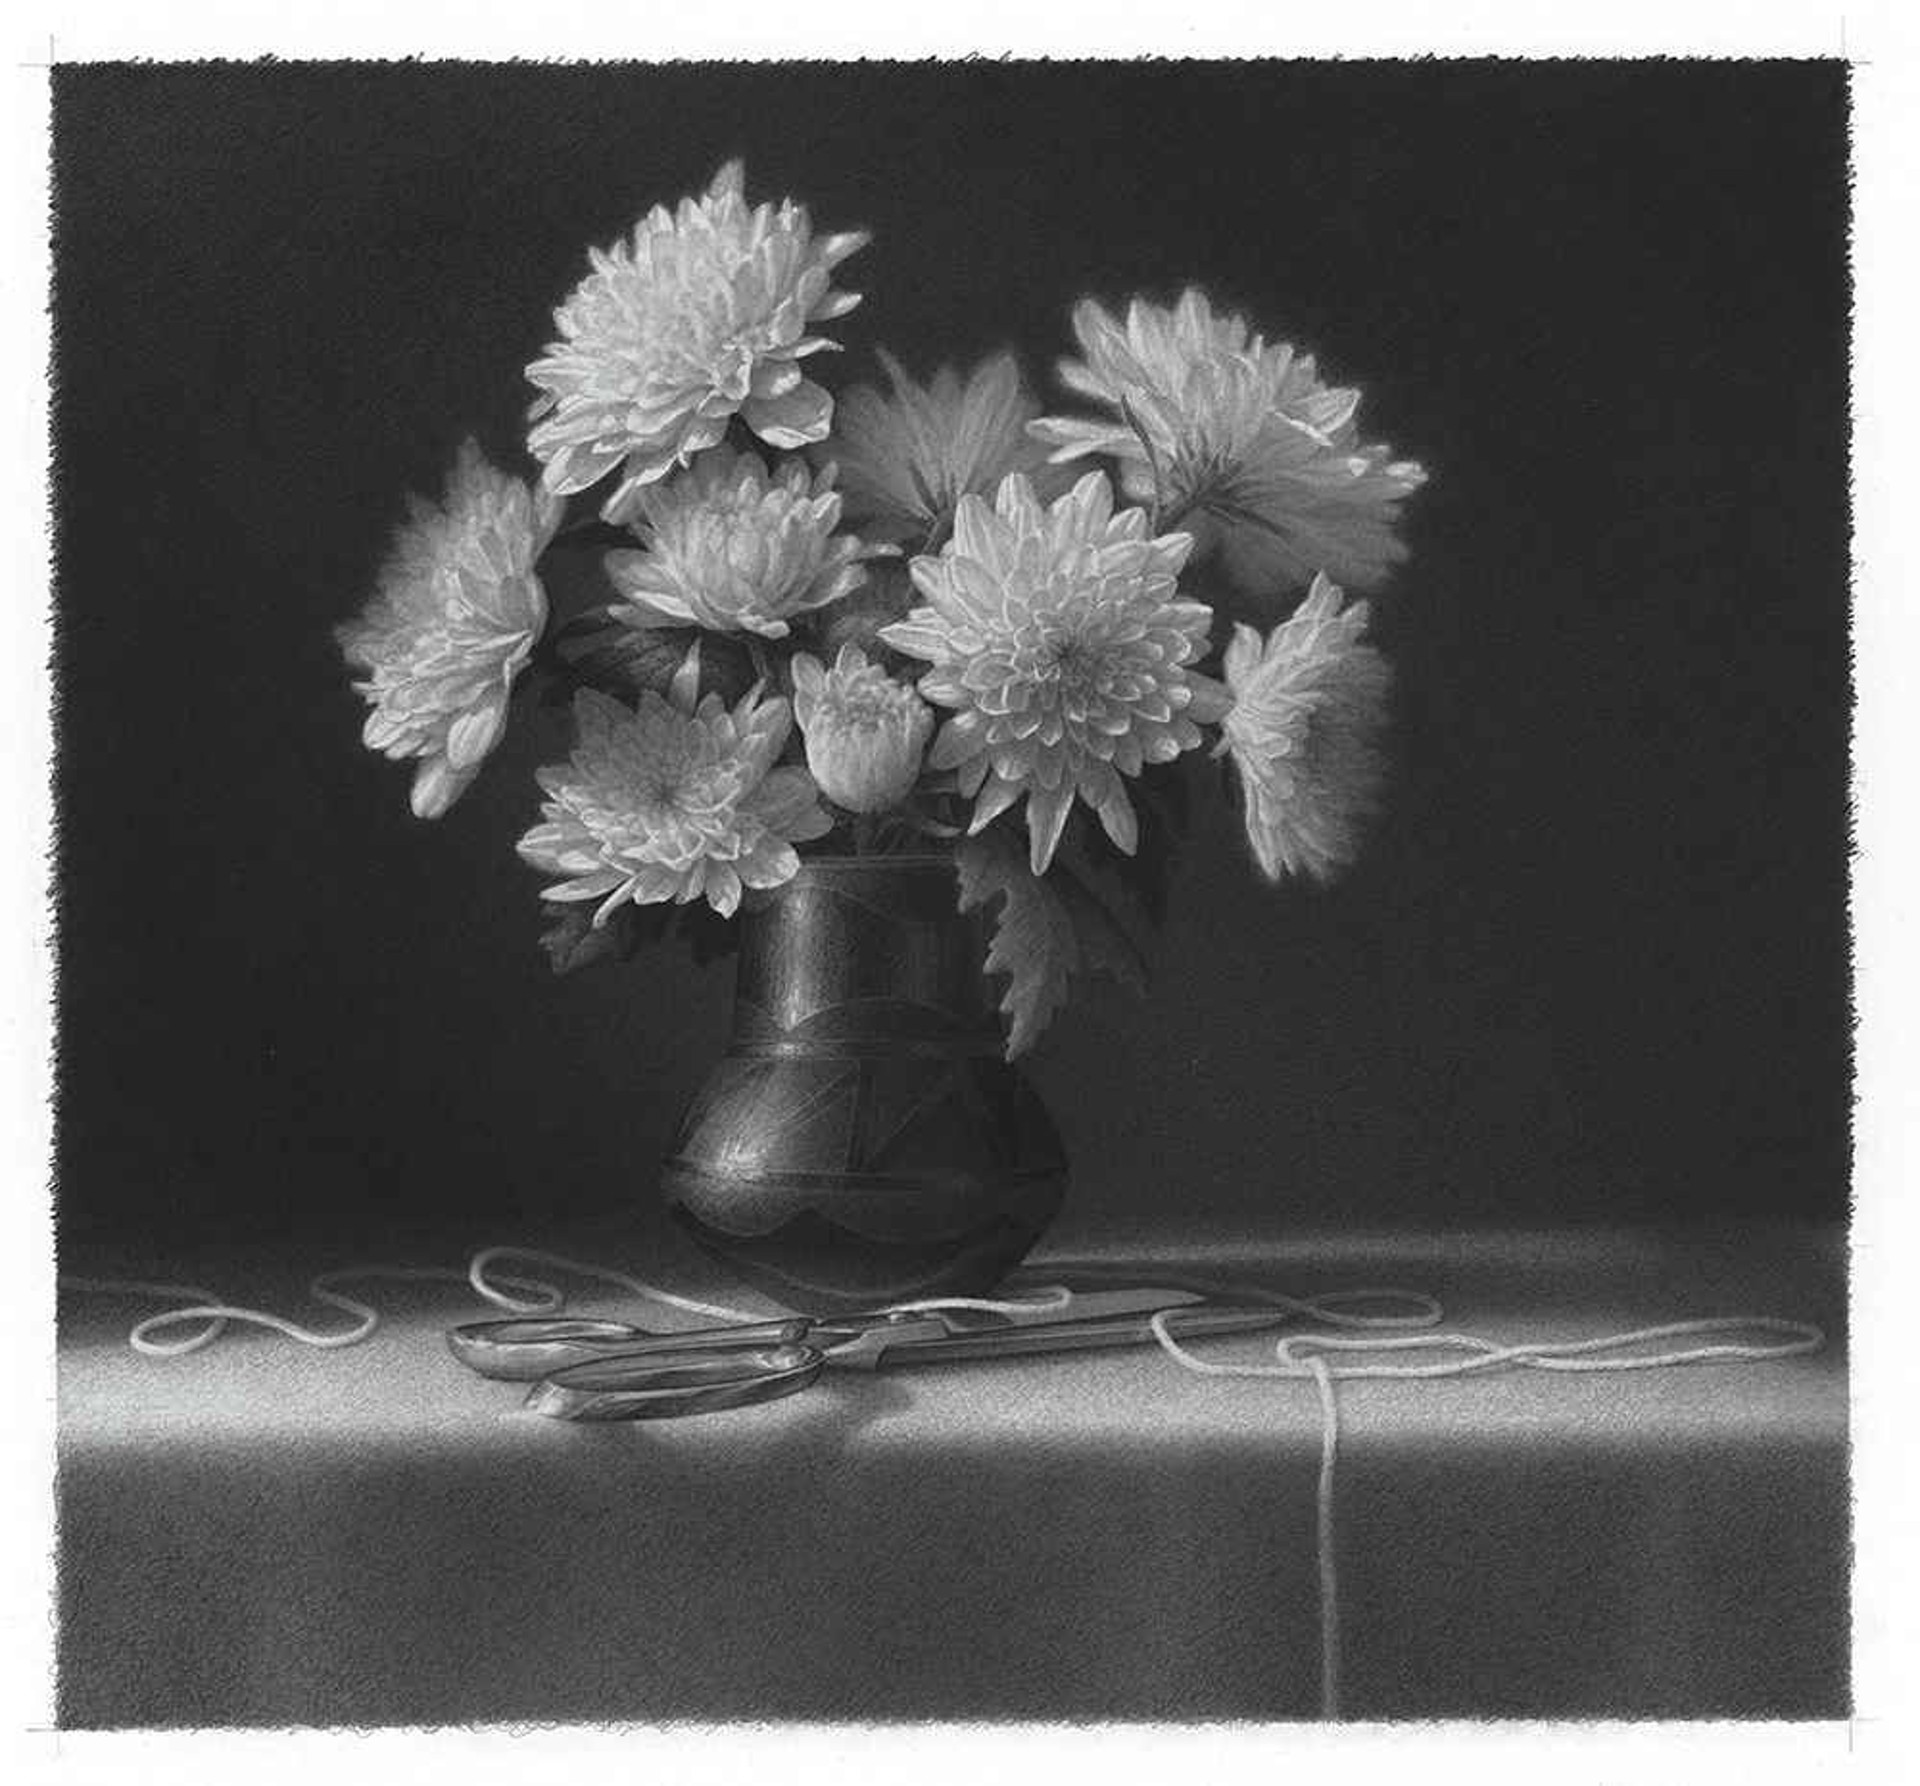 Mums with Scissors and String by Skip Steinworth